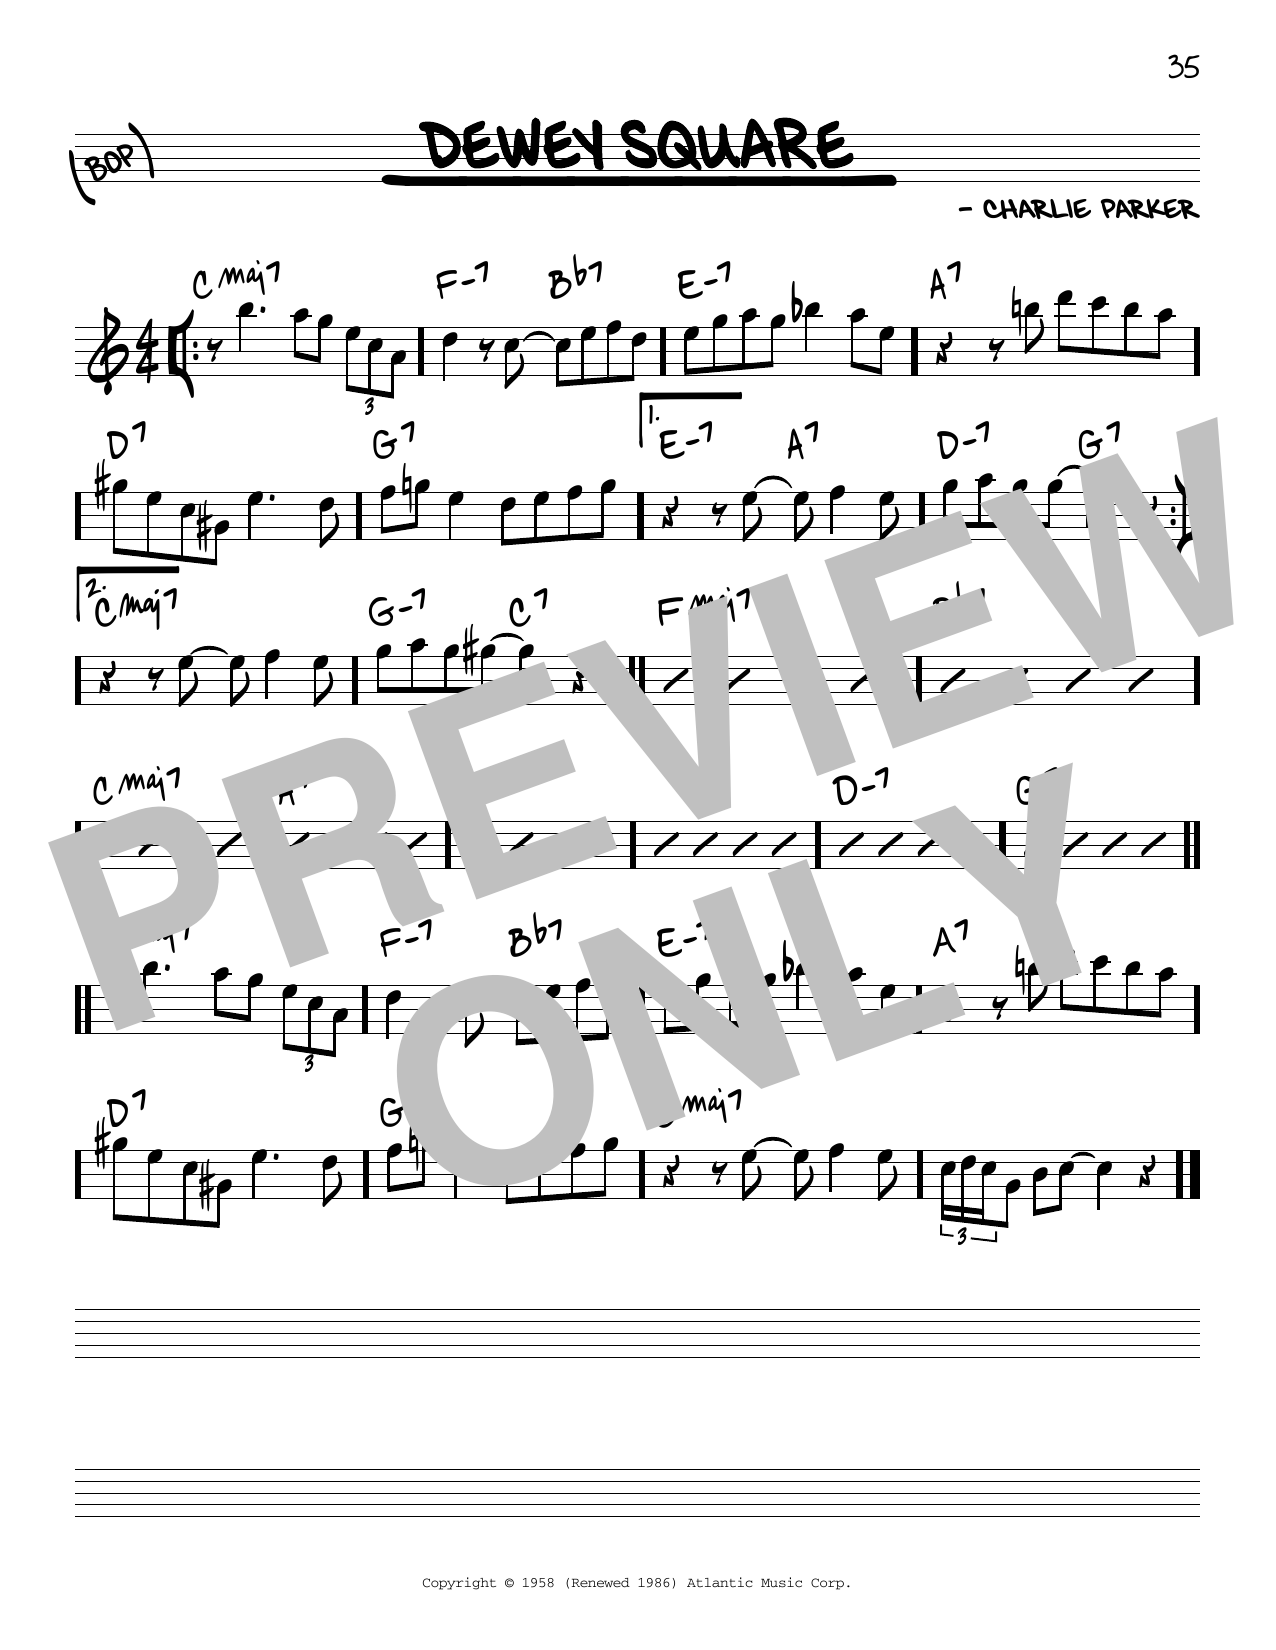 Charlie Parker Dewey Square sheet music notes and chords. Download Printable PDF.